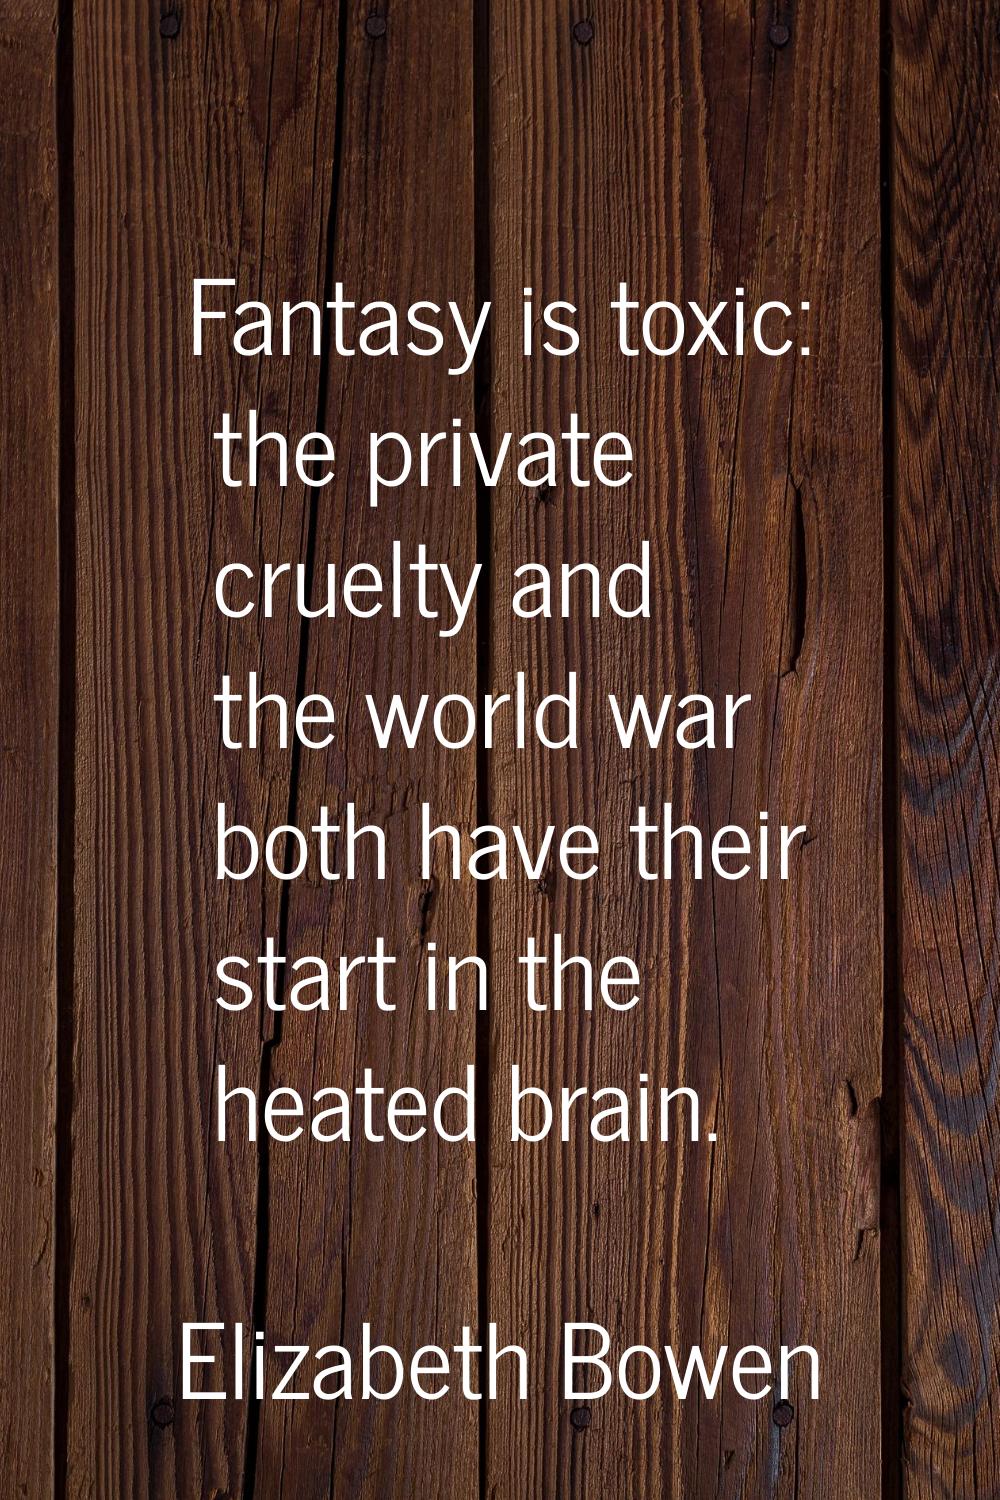 Fantasy is toxic: the private cruelty and the world war both have their start in the heated brain.